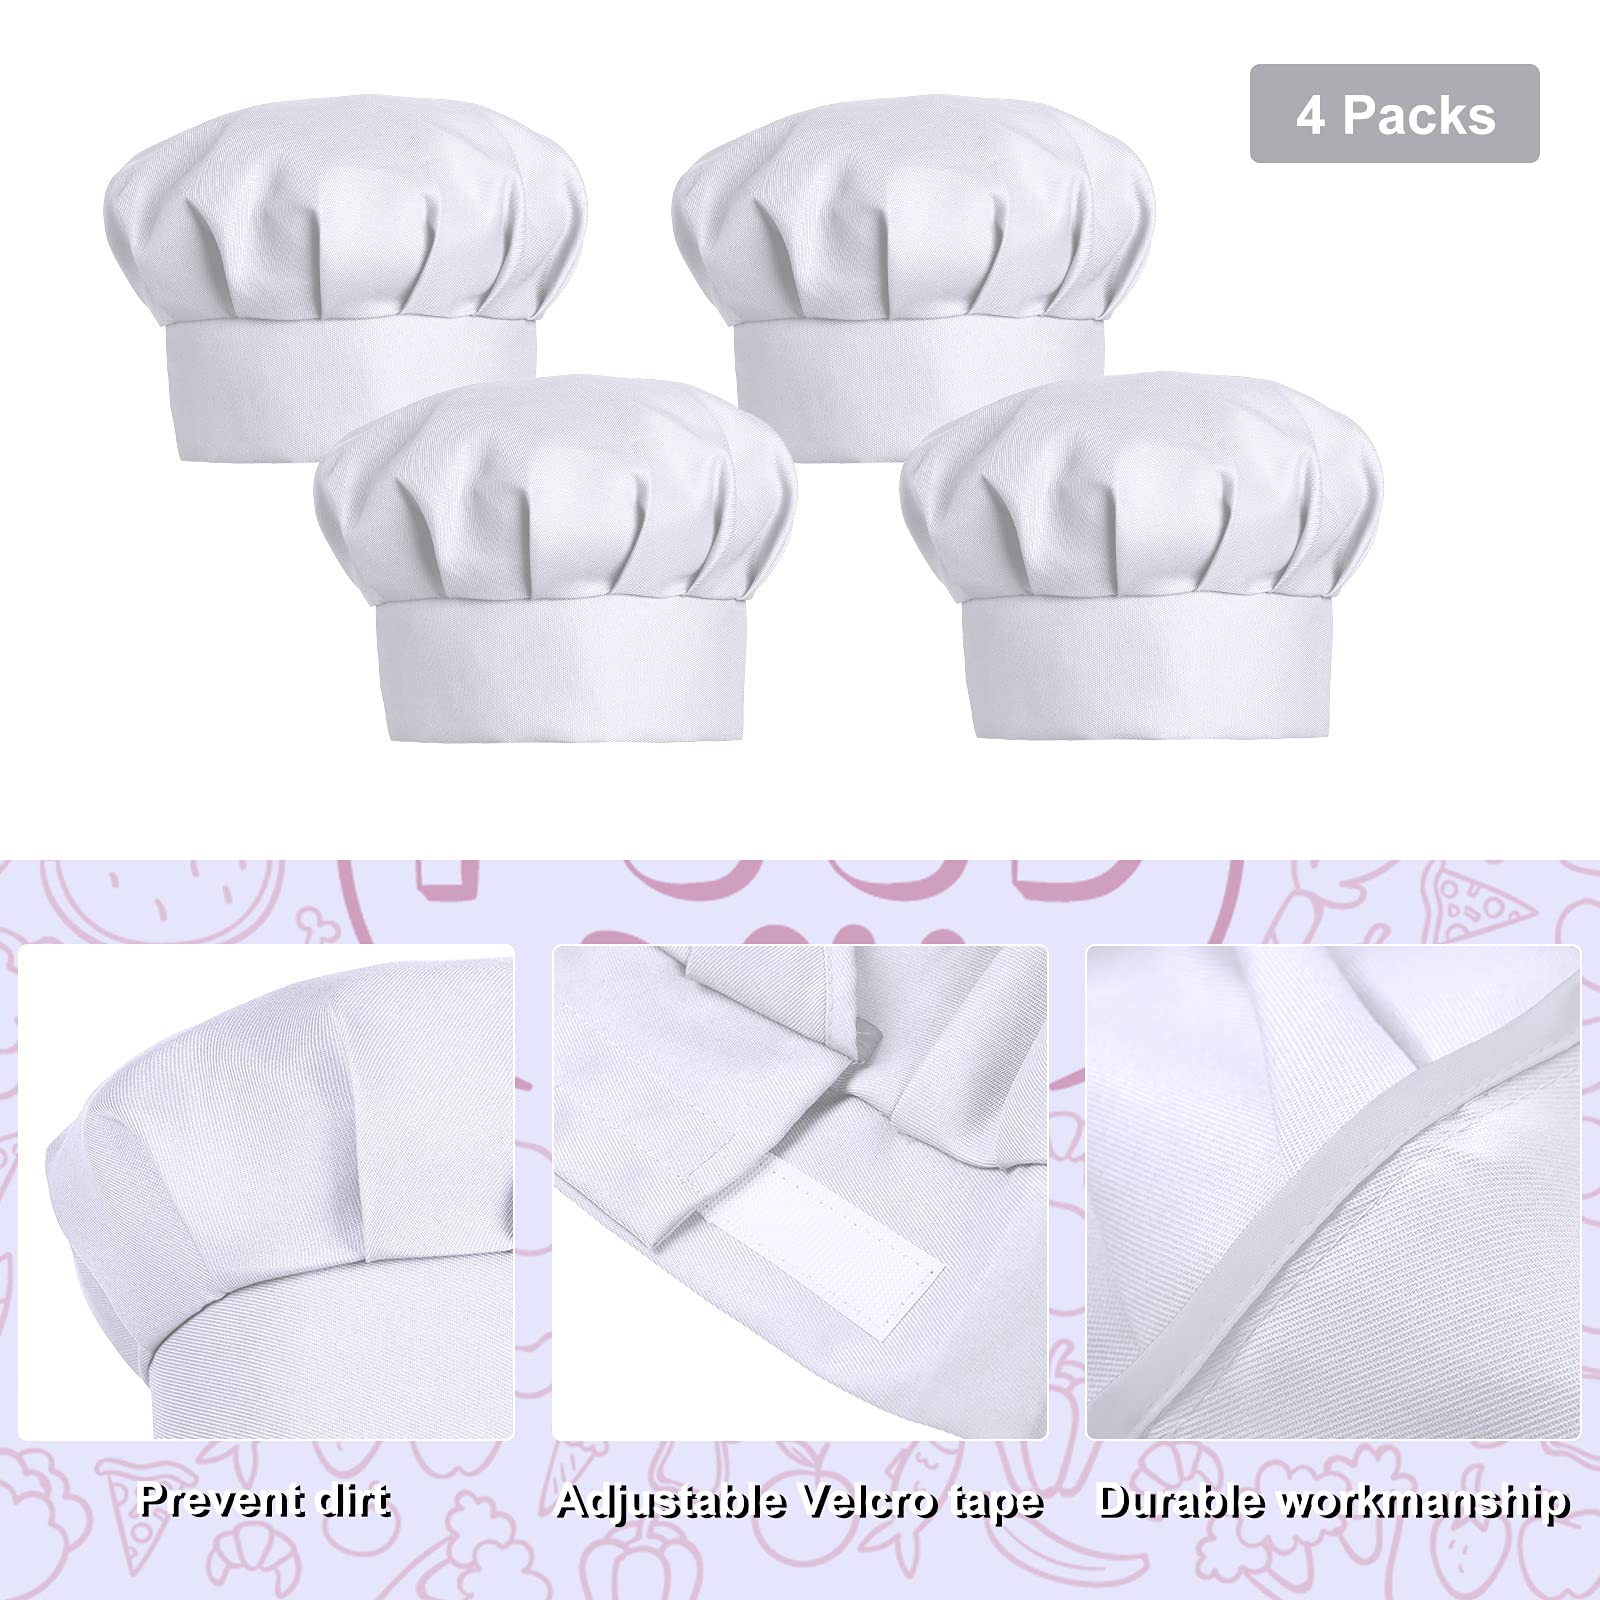 4 PCS Adjustable Kids Chef Hat Chef Toques Cooking Baker Chef Cap for Aged 2-5 (White)